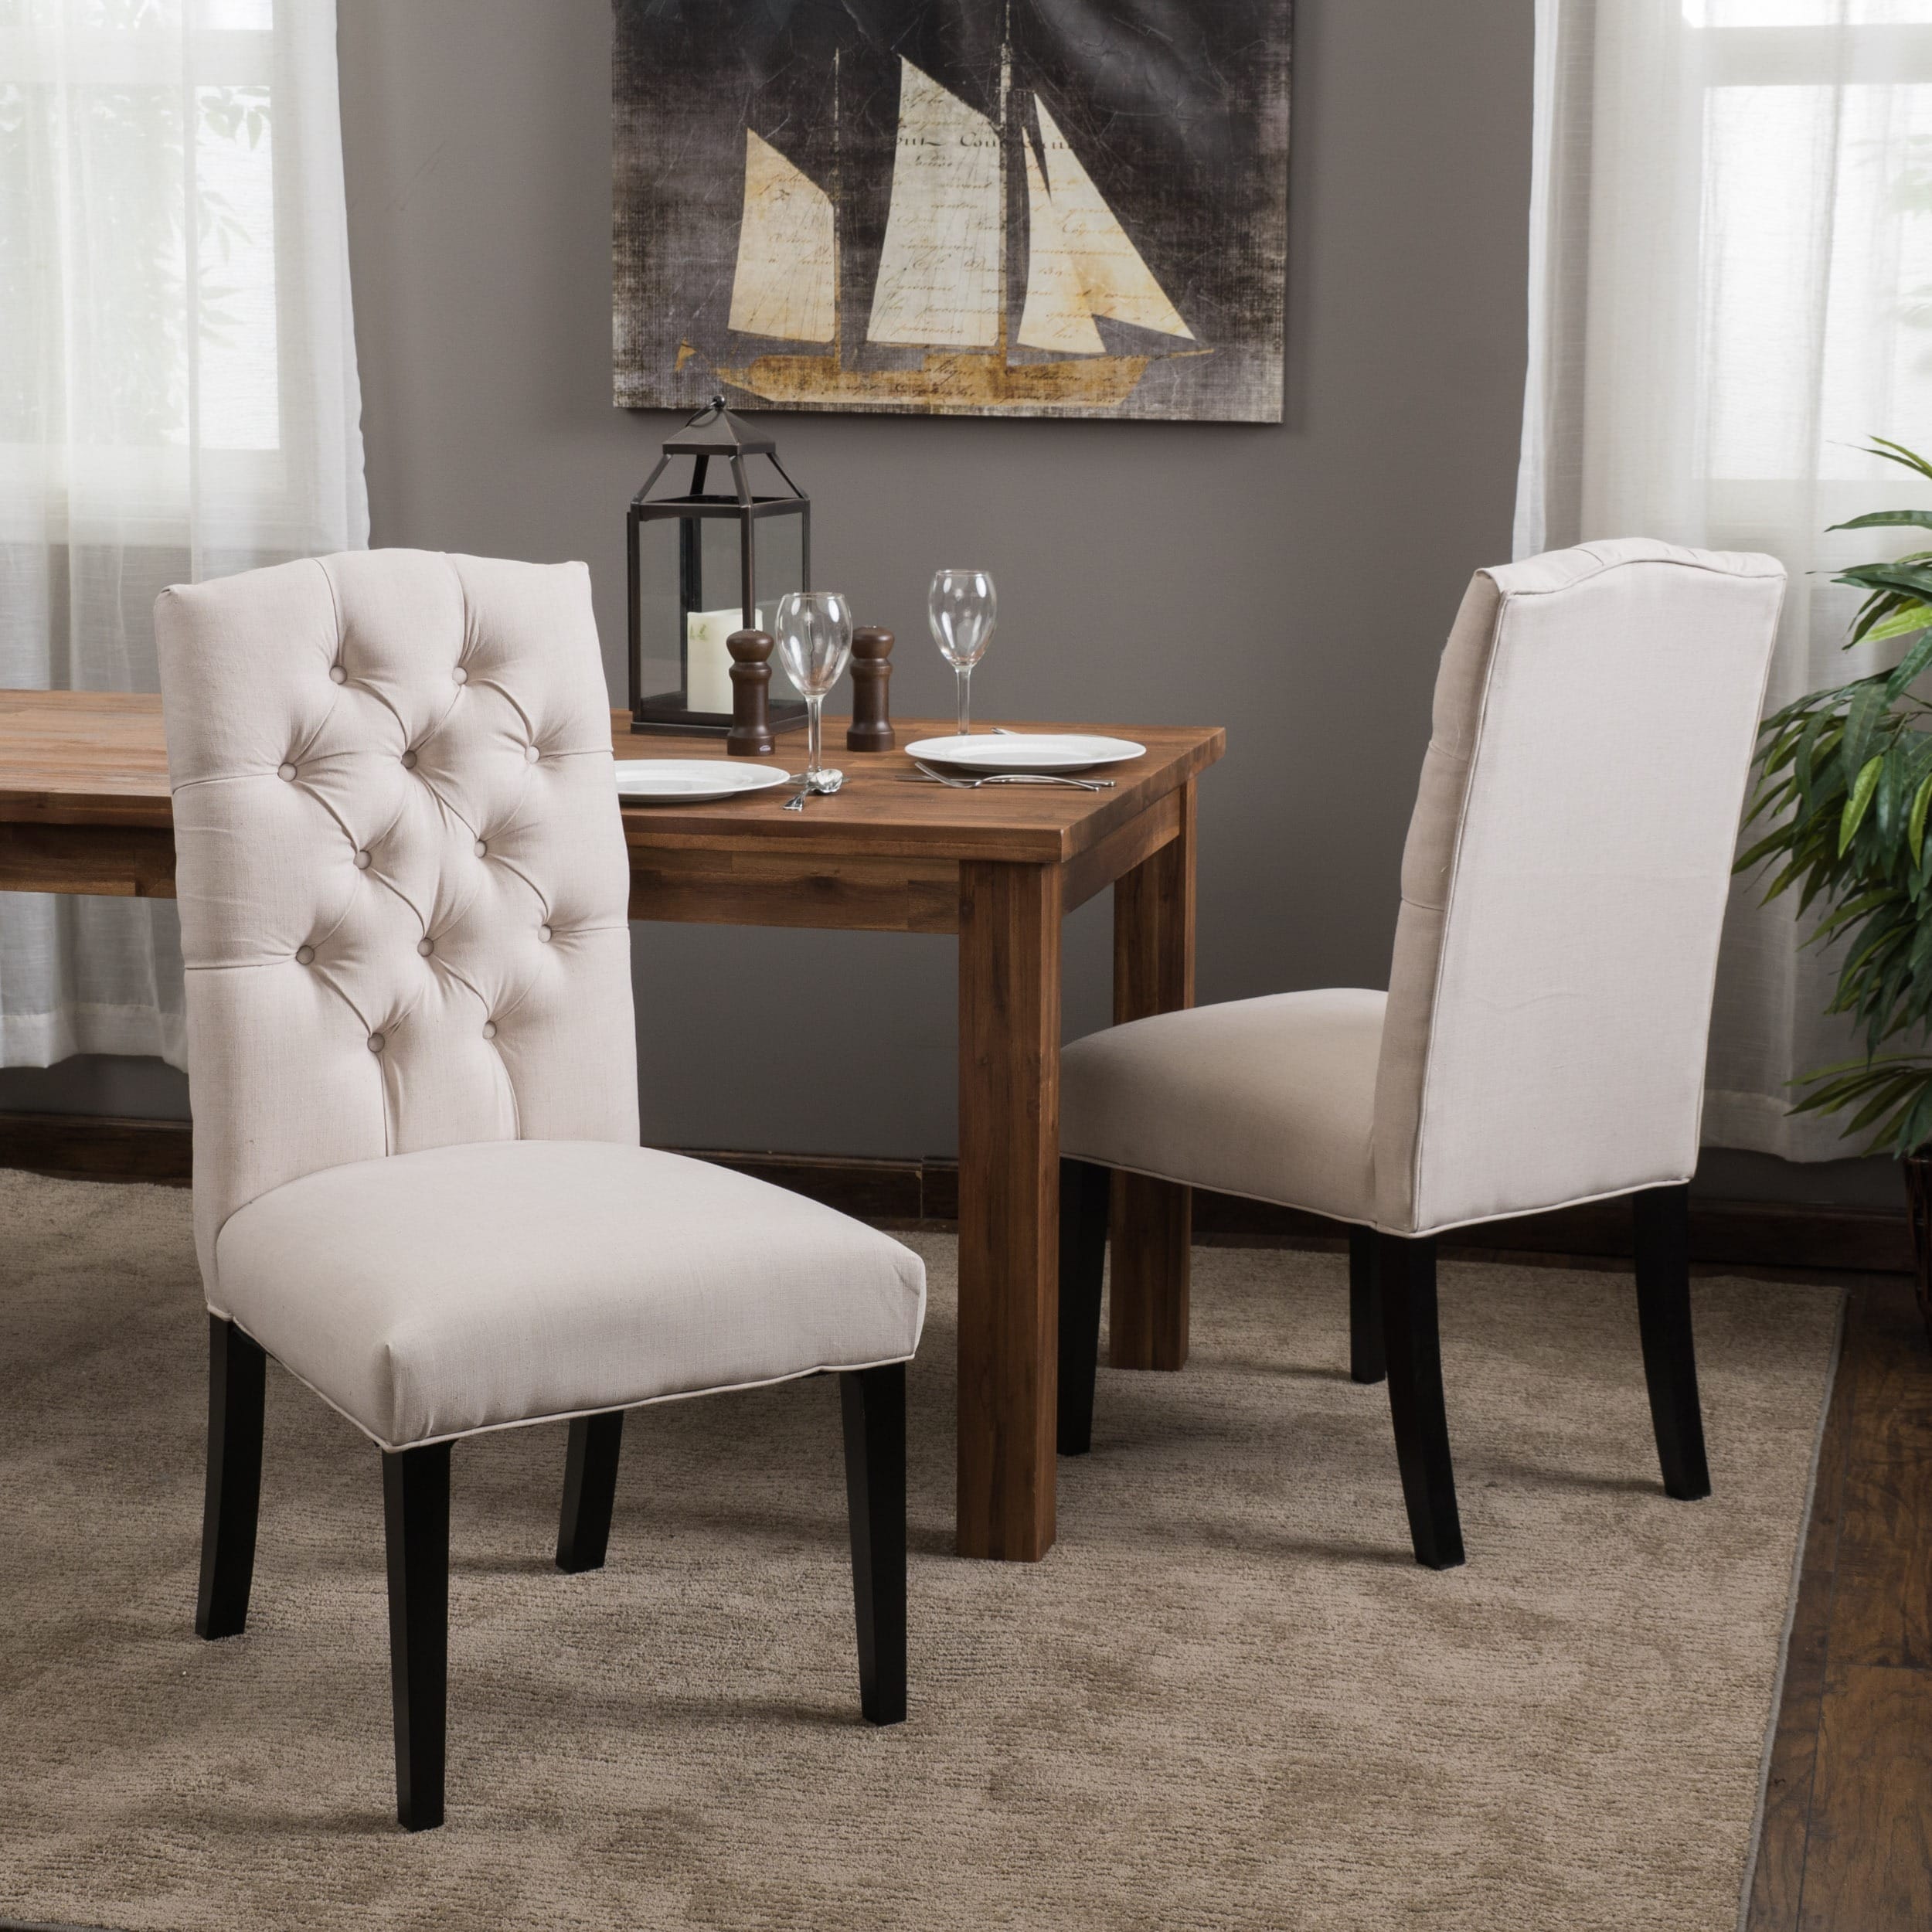 Crown Fabric Off White Dining Chairs Set Of 2 By Christopher Knight Home Overstock 6036756